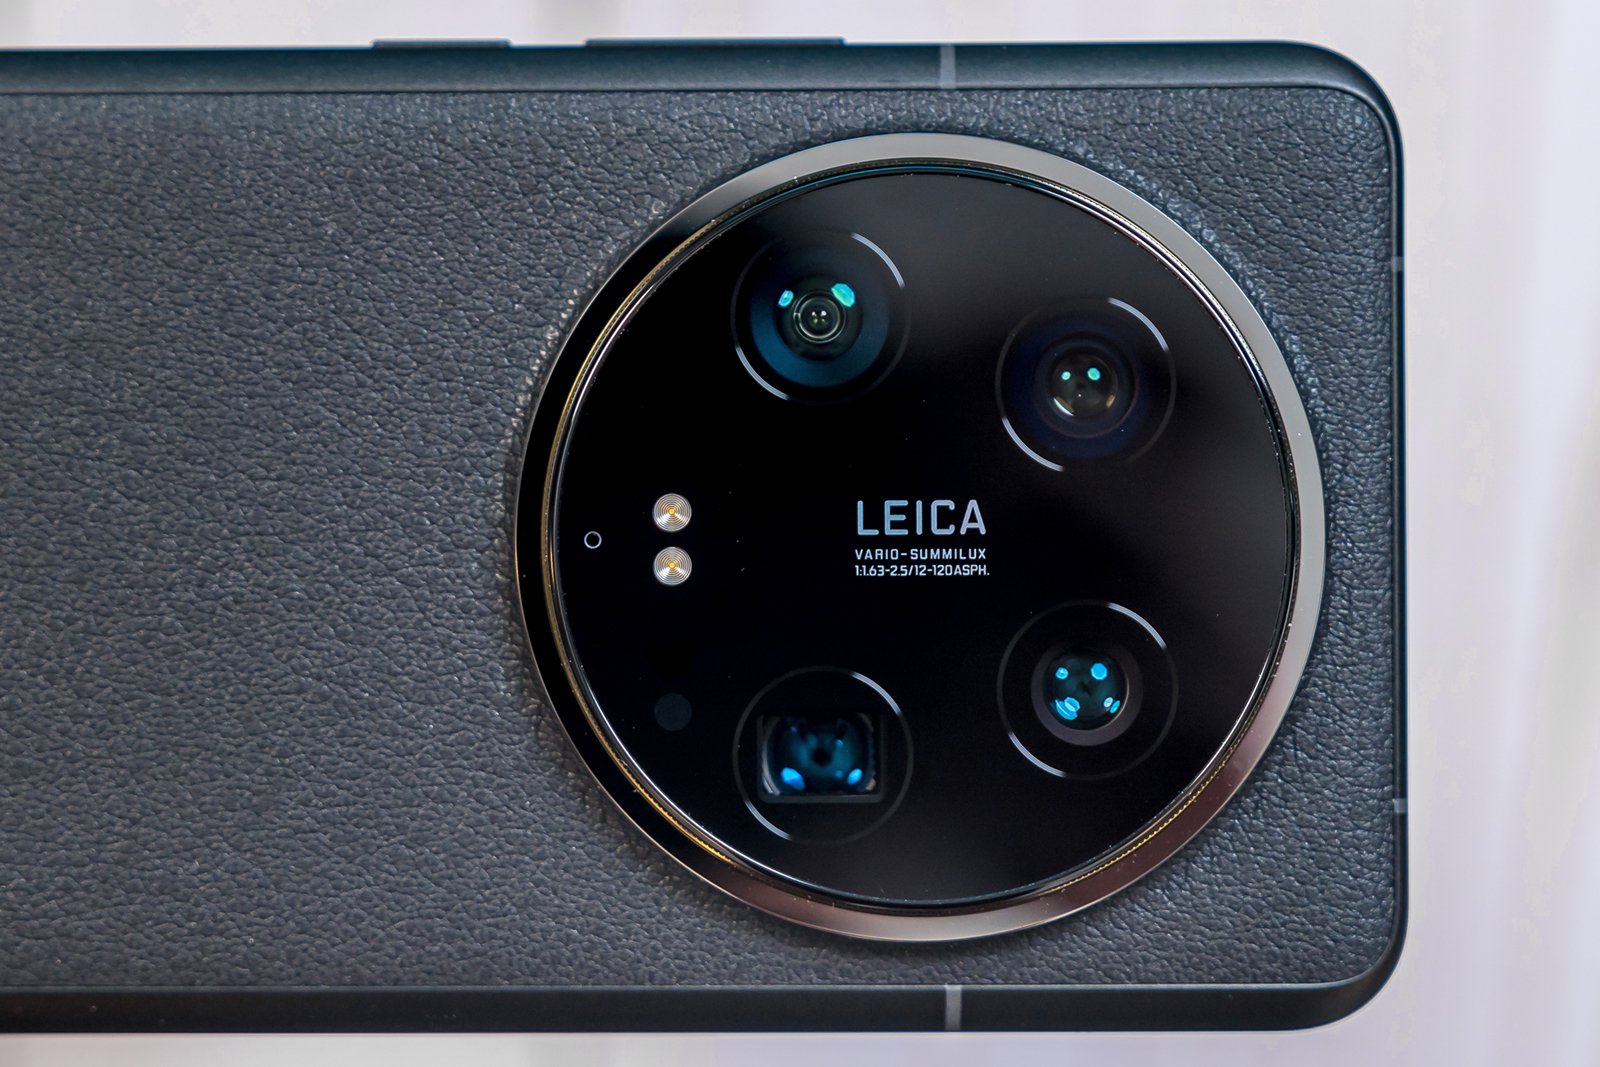 Close-up of a smartphone's black rear camera module branded by leica, featuring four lenses arranged symmetrically, with a flash and sensor visible.